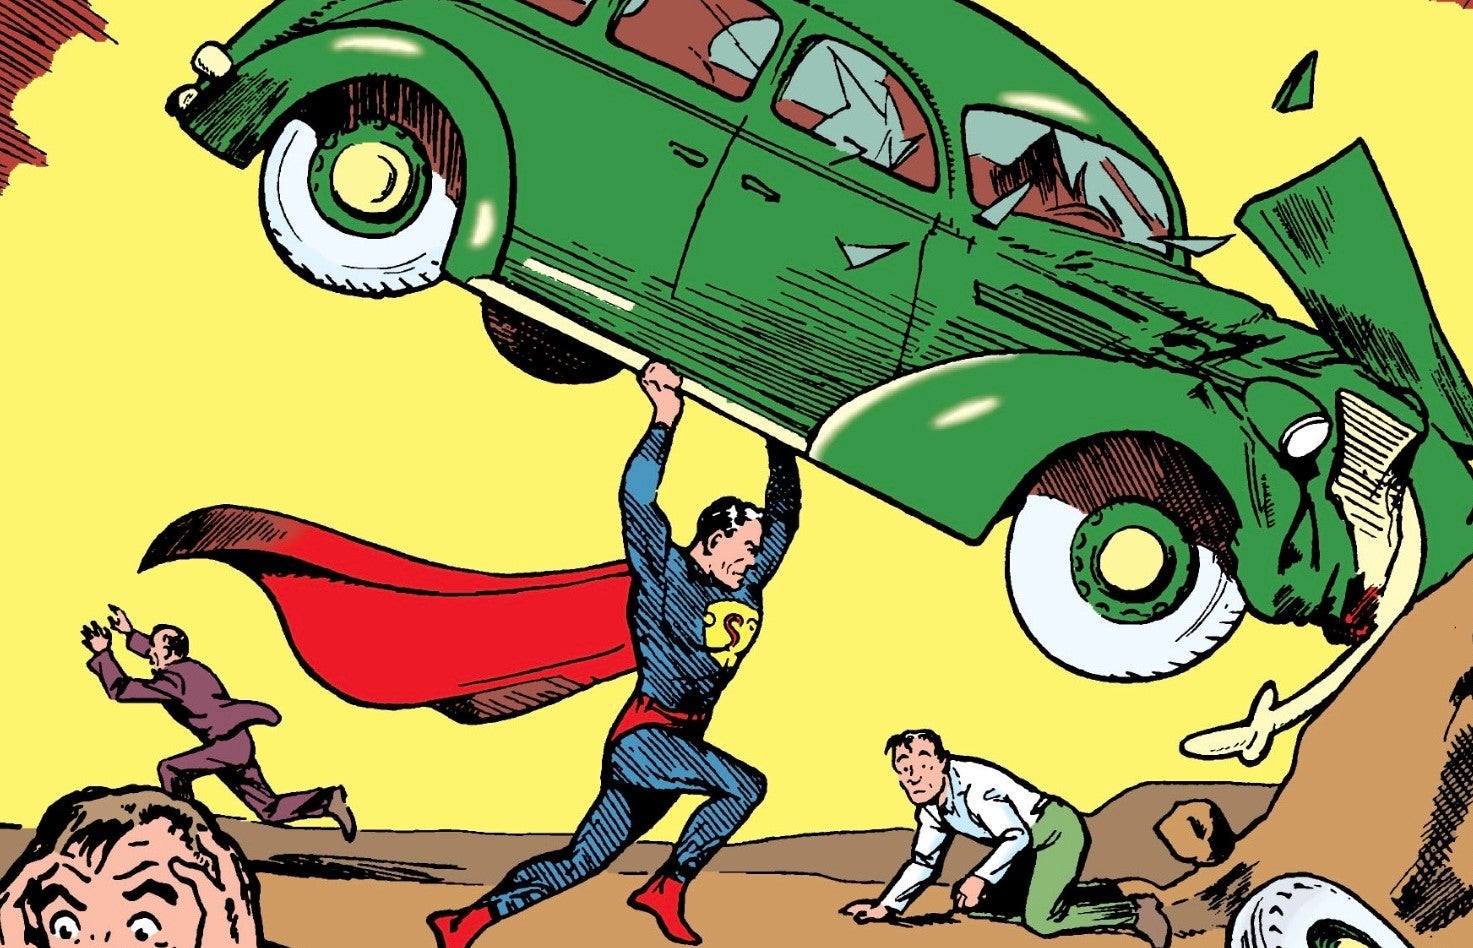 DC Action Comics Issue One cover art, Superman is lifting a crashed green car above his head.